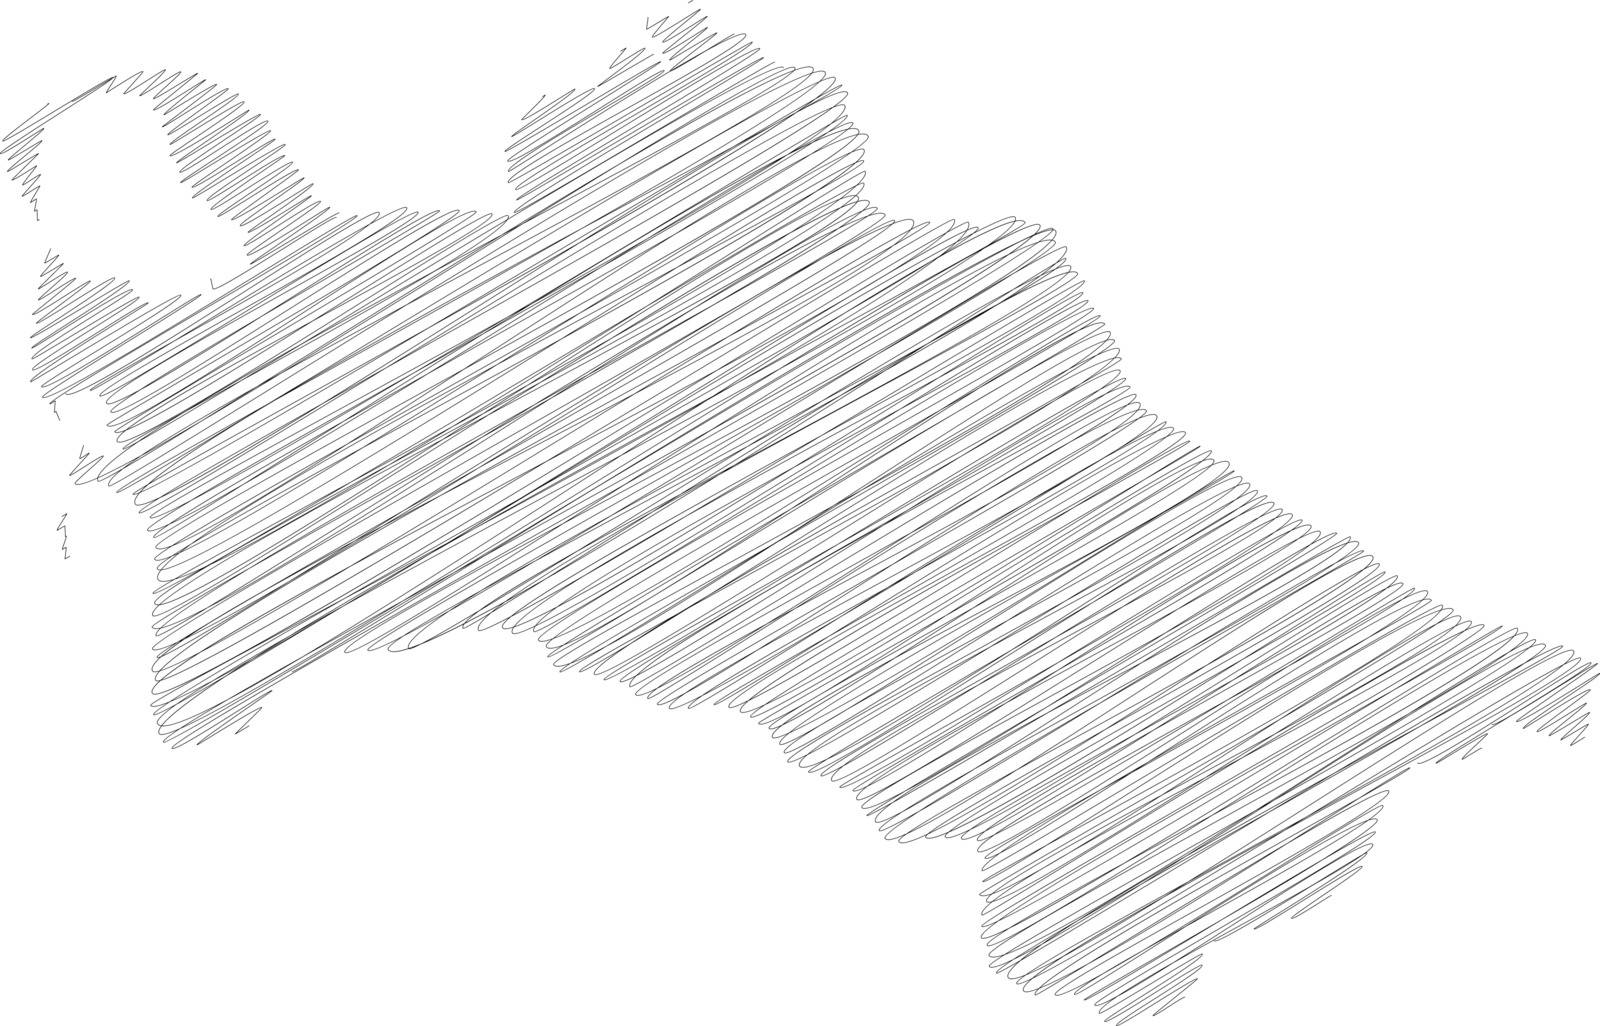 Turkmenistan - pencil scribble sketch silhouette map of country area with dropped shadow. Simple flat vector illustration.